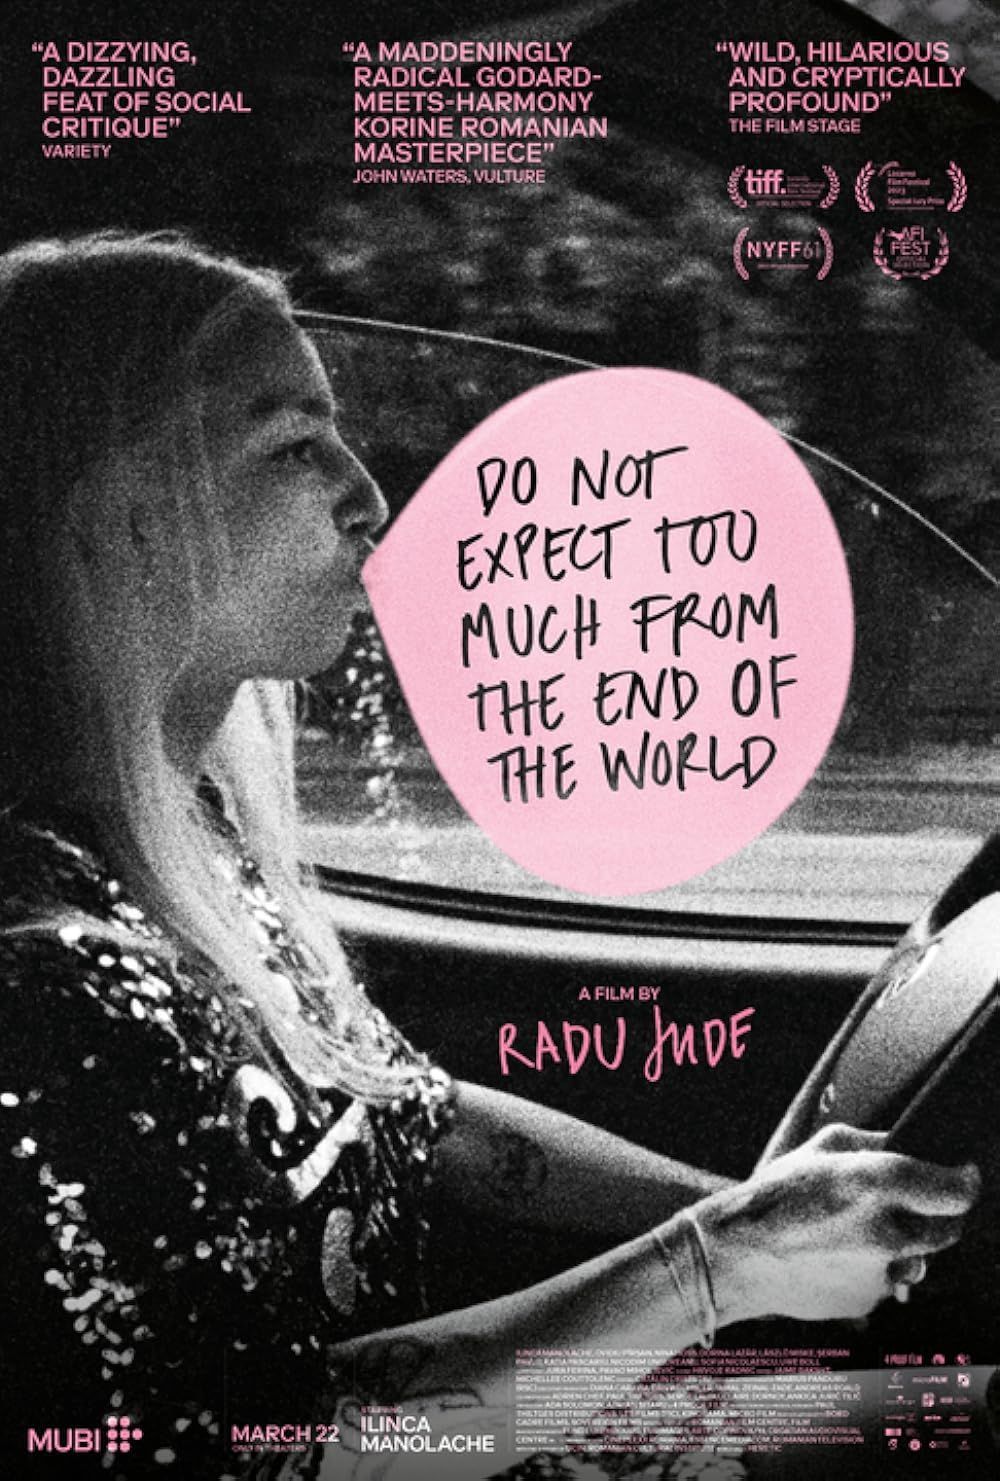 Awaiting Apocalypse at a Red Light: On Radu Jude’s “Do Not Expect Too Much from the End of the World”